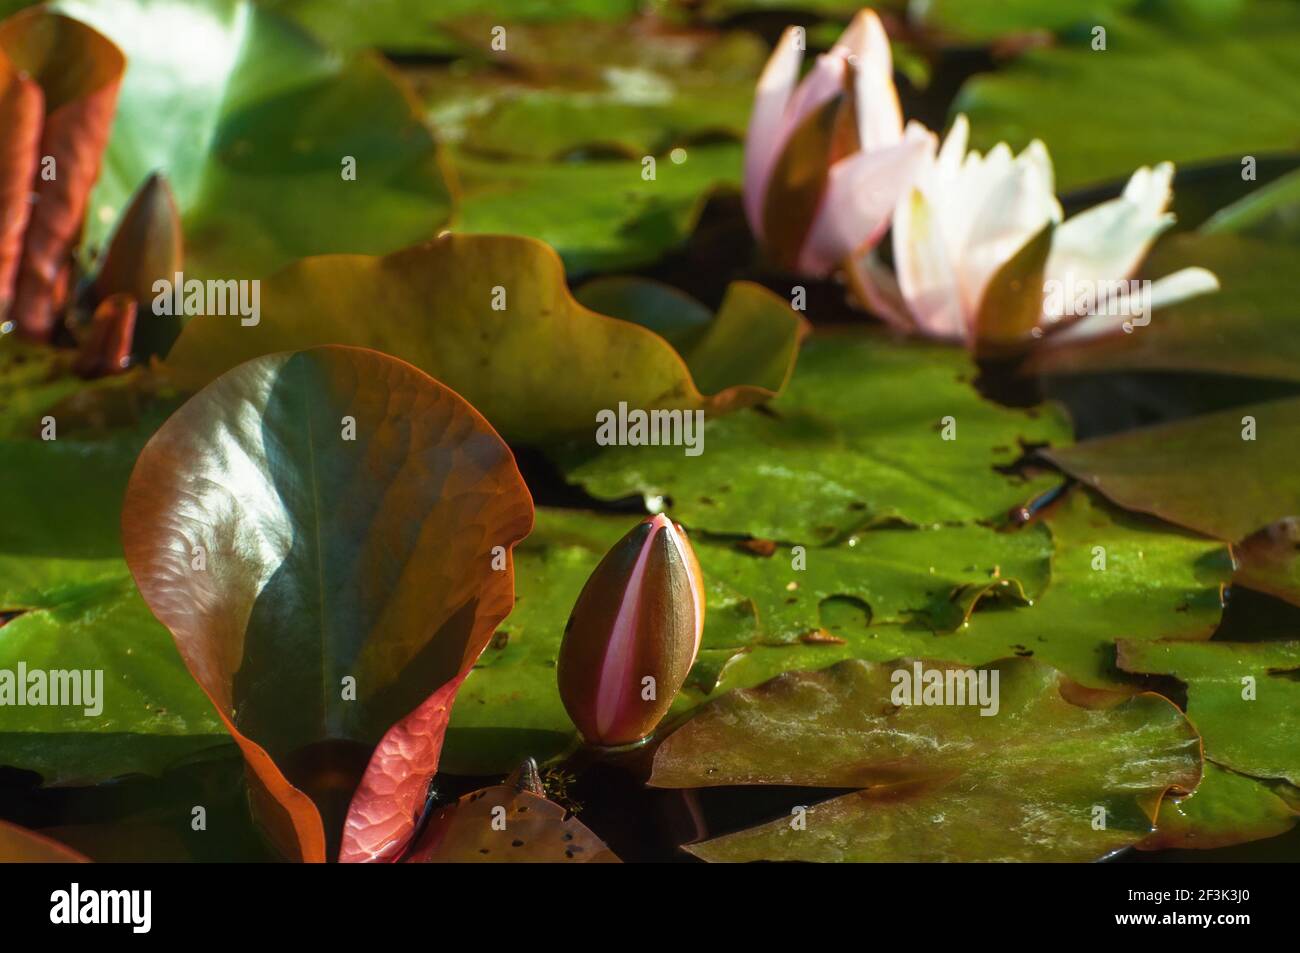 Blooming waterlily flower and buds on surface of garden pond, closeup. Stock Photo